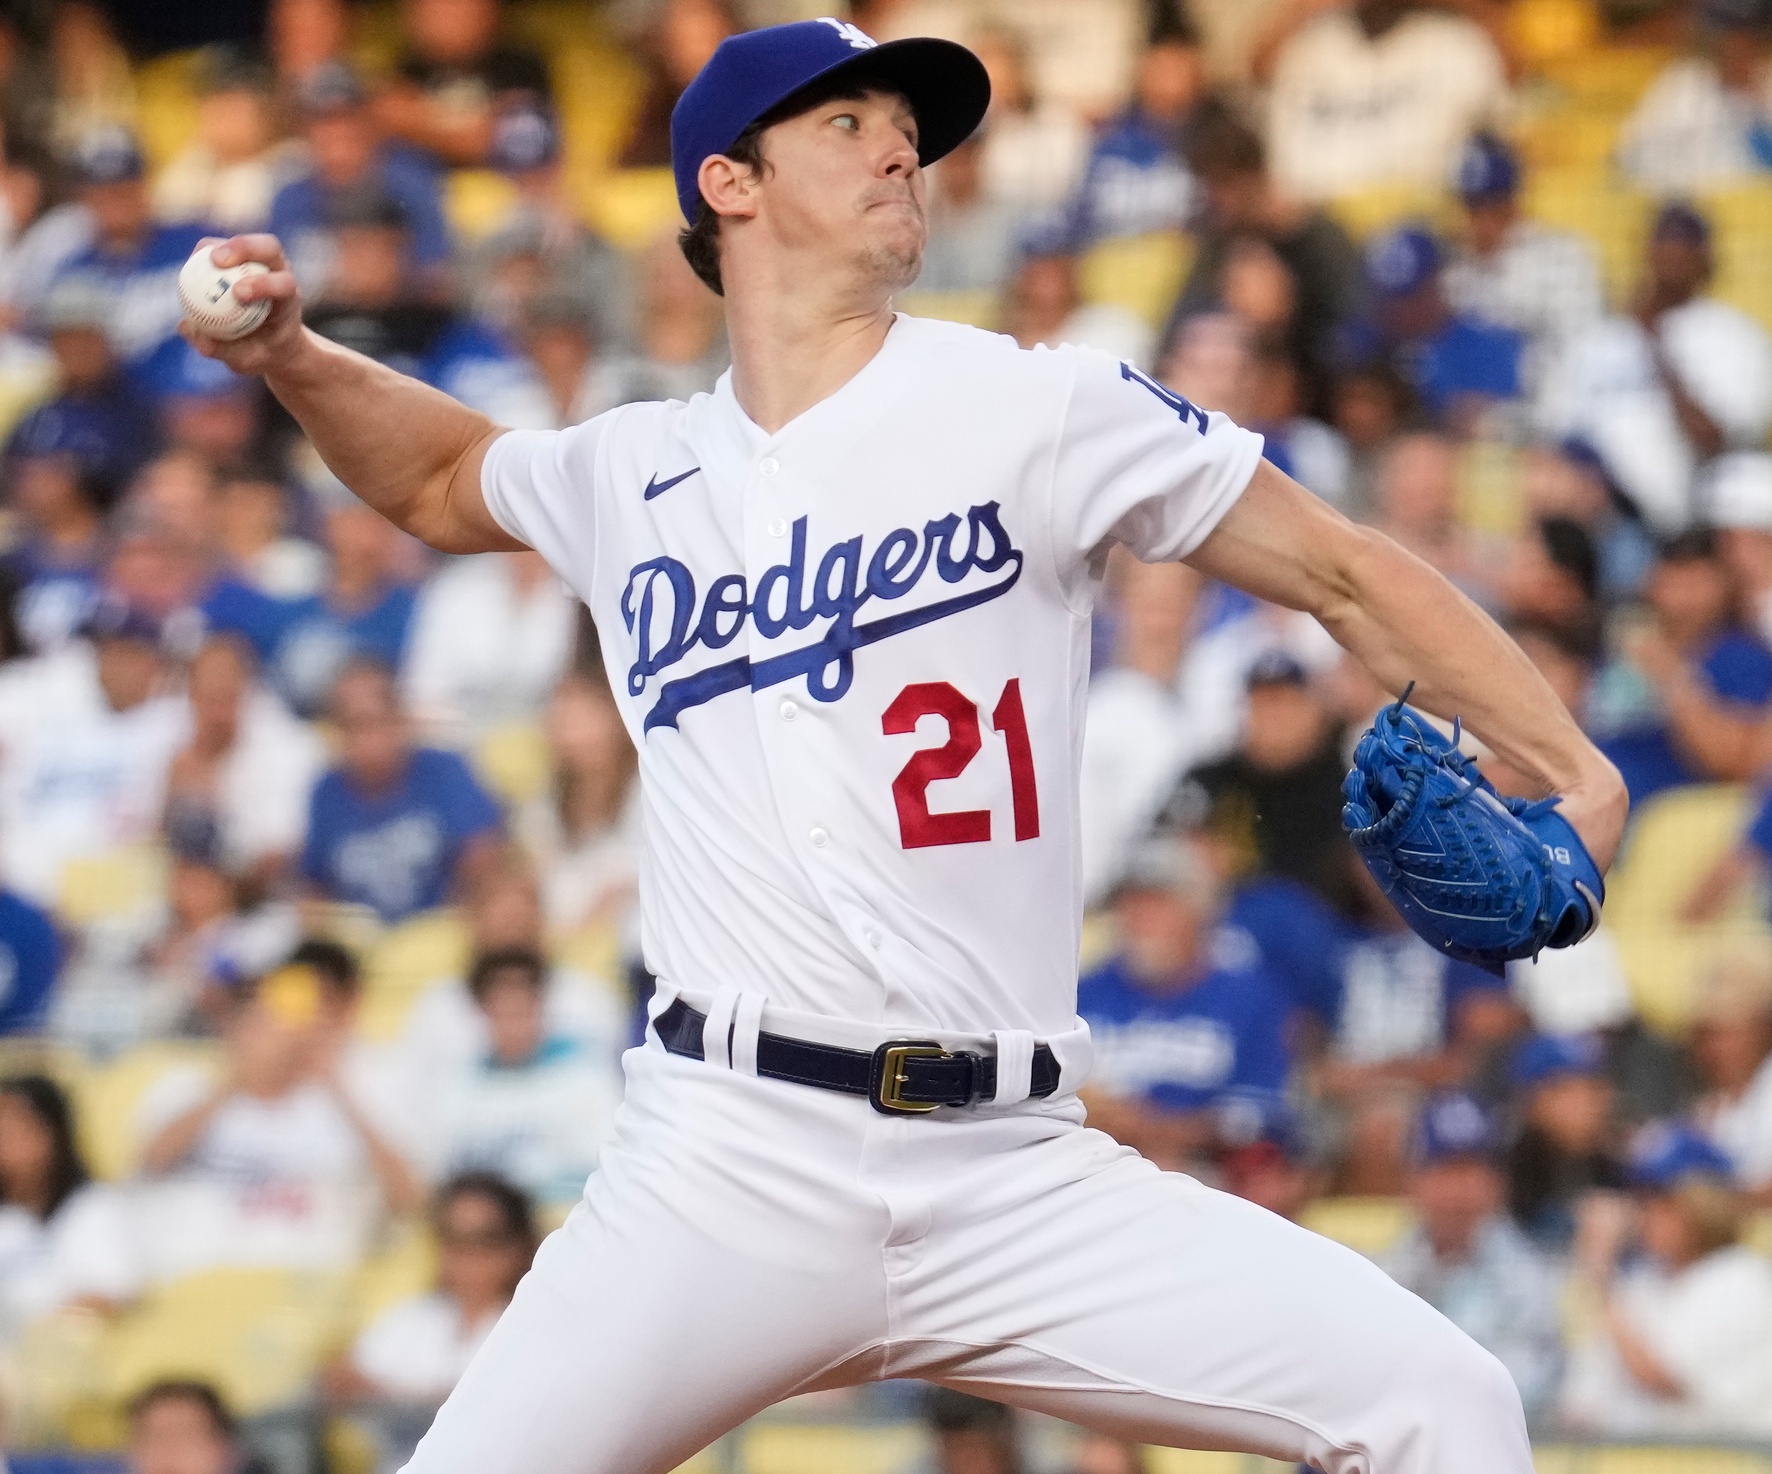 Jun 29, 2021; Los Angeles, California, USA; Los Angeles Dodgers starting pitcher Walker Buehler (21) throws a pitch in the first inning against the San Francisco Giants at Dodger Stadium. Mandatory Credit: Robert Hanashiro-USA TODAY Sports